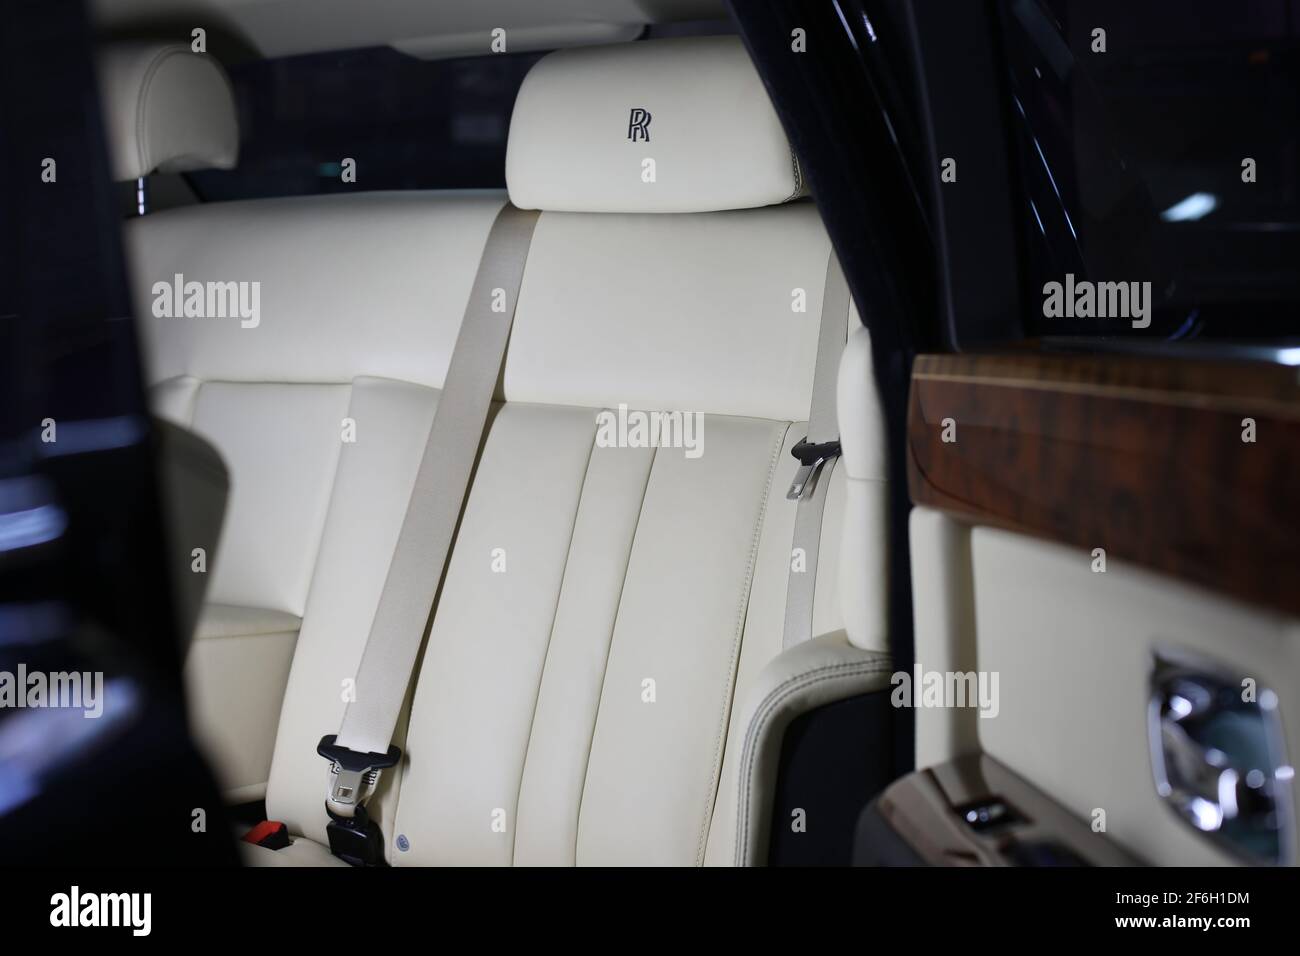 The Hand Stitched Headrest And Interior Of A 2009 Rolls Royce Phantom With White Leather And Wooden Door Trim Stock Photo